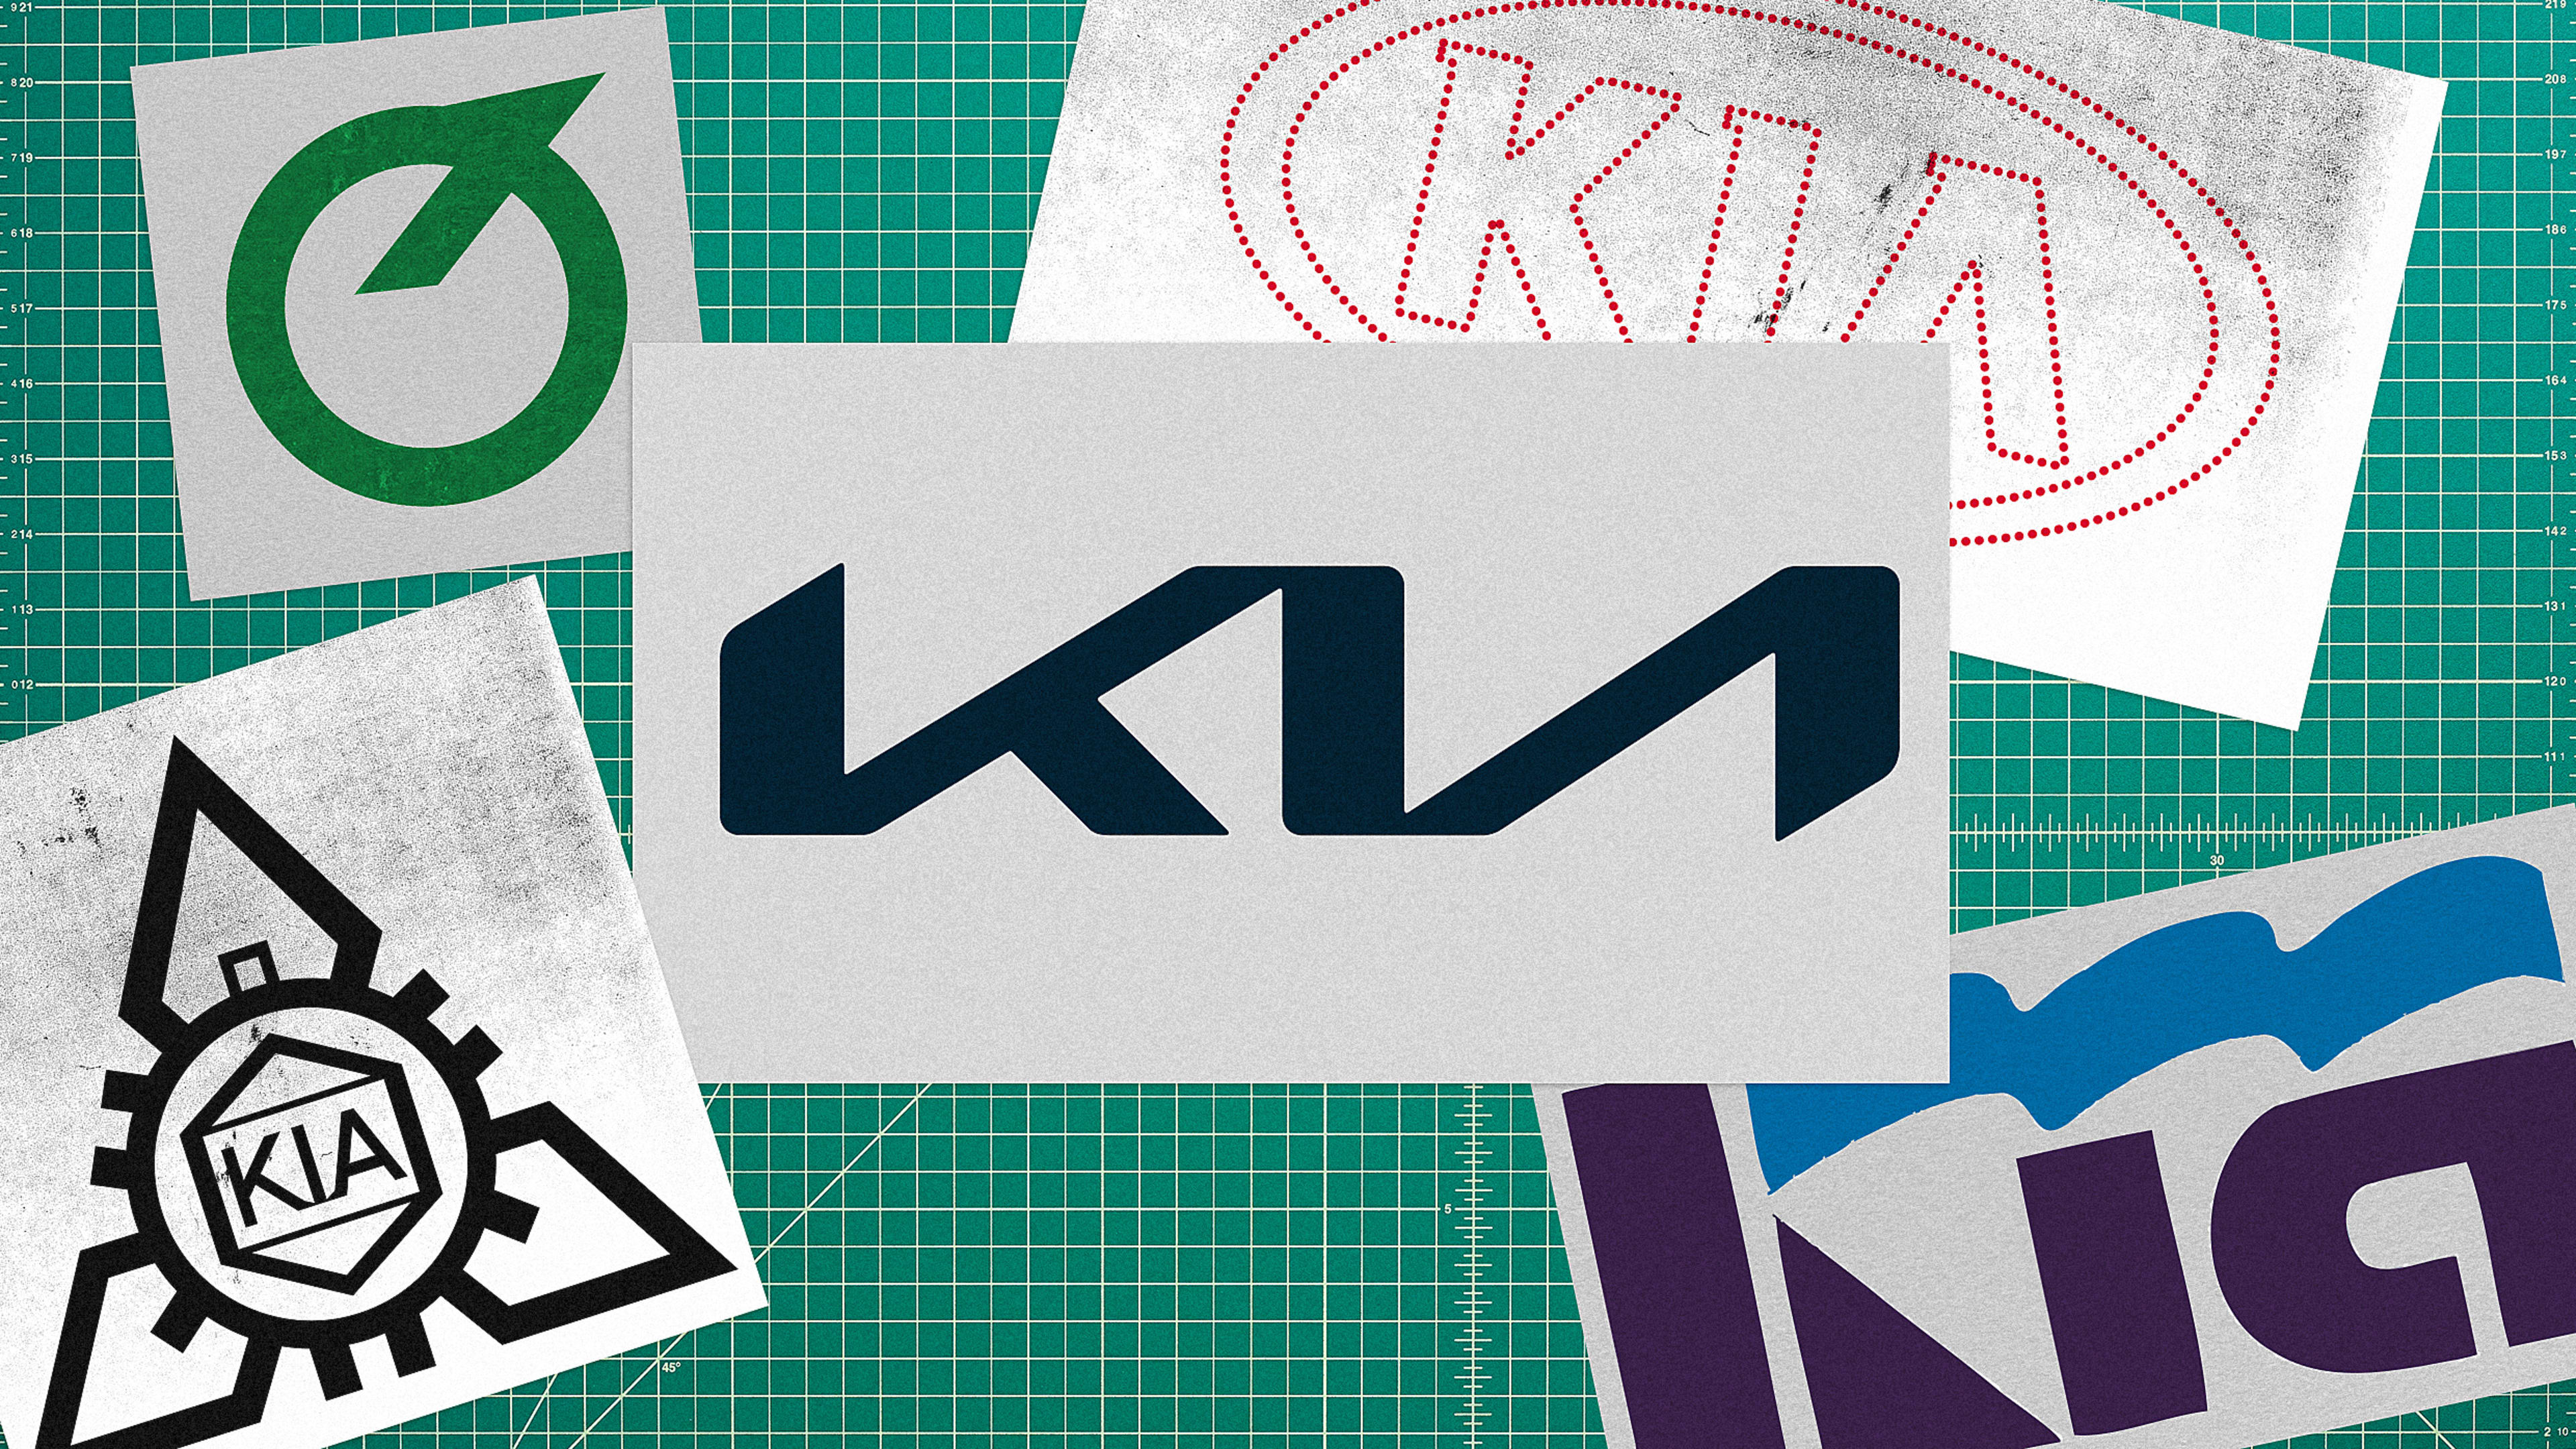 Kia's logo: The history, meaning, and evolution of the car